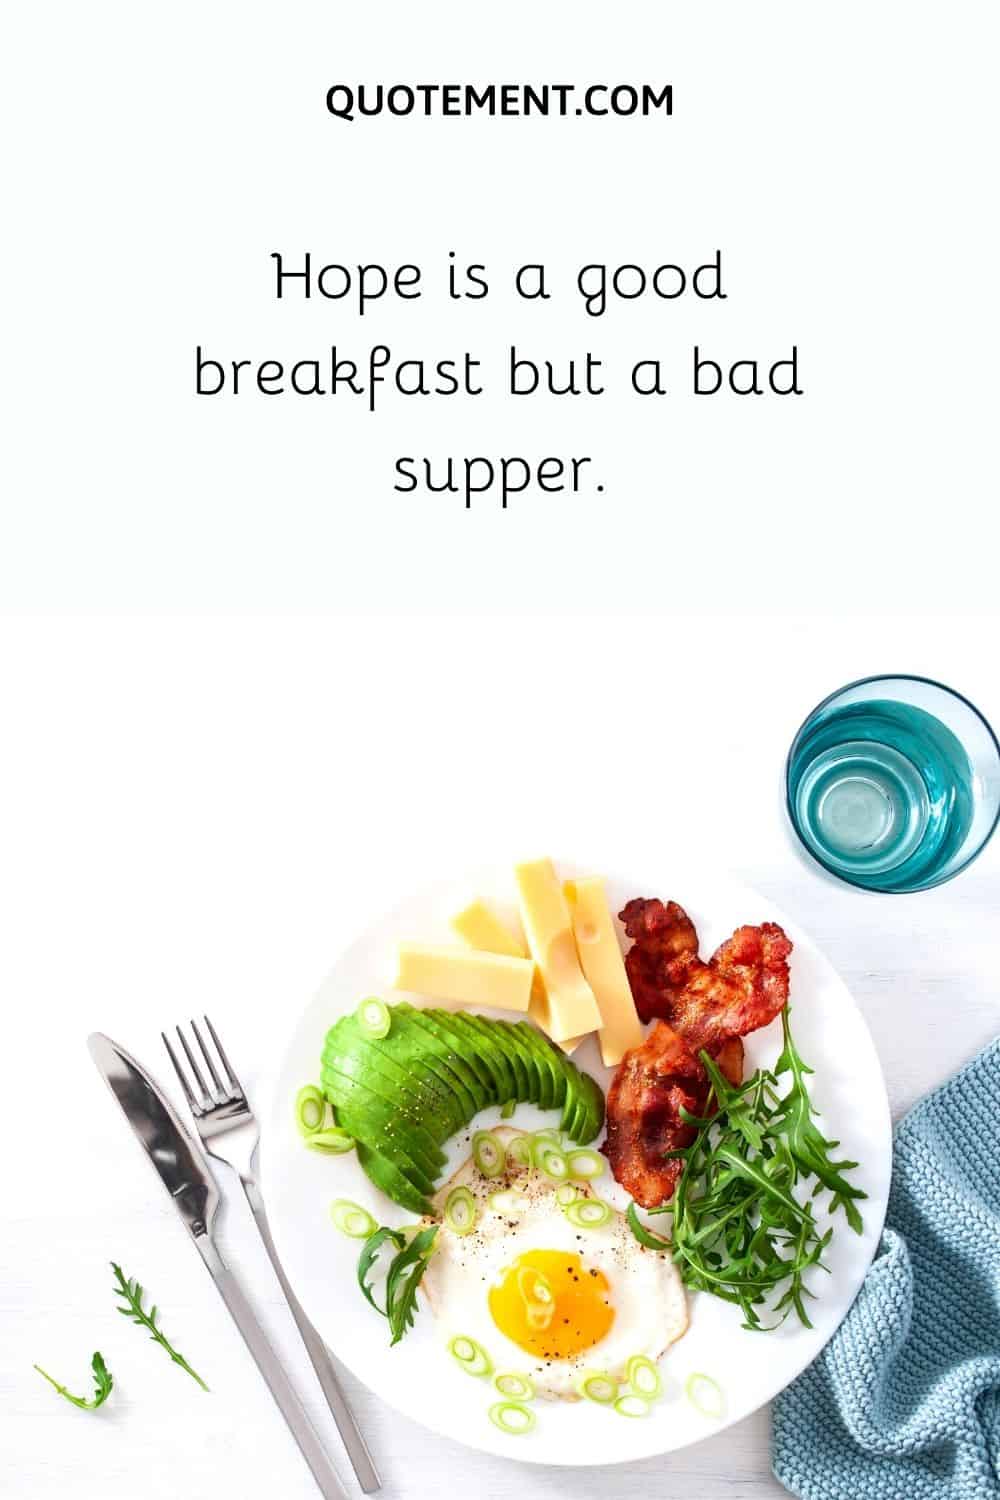 Hope is a good breakfast but a bad supper.